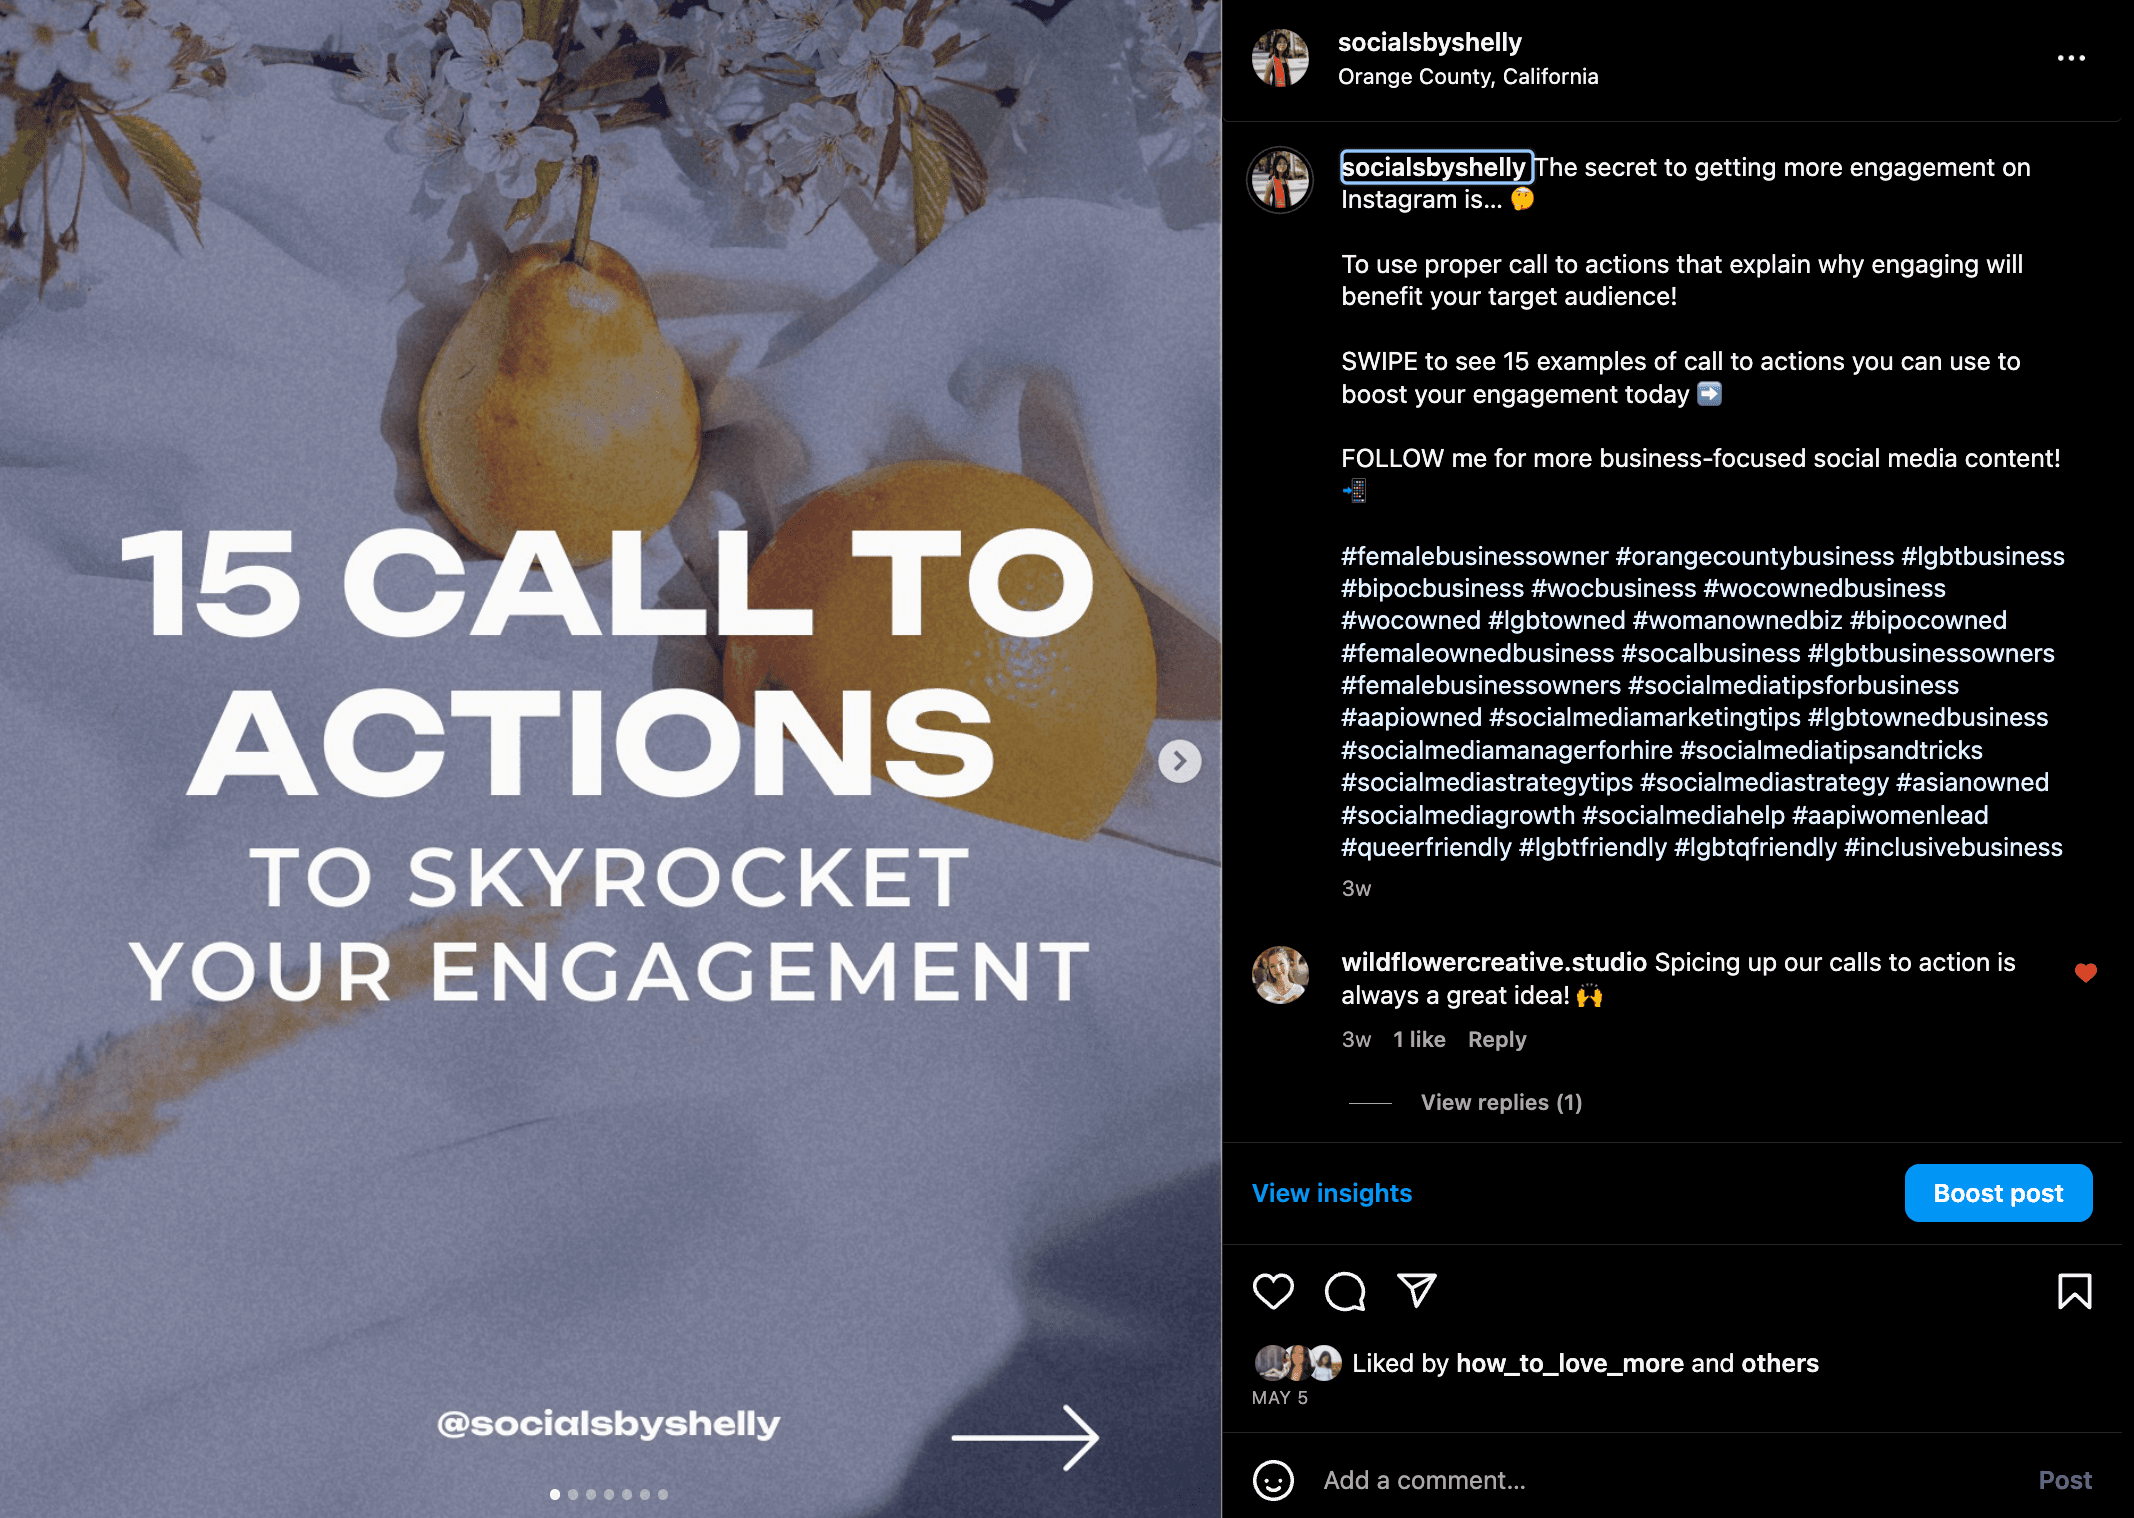 Socials by Shelly Instagram post: 15 CALL TO ACTIONS TO SKYROCKET YOUR ENGAGEMENT